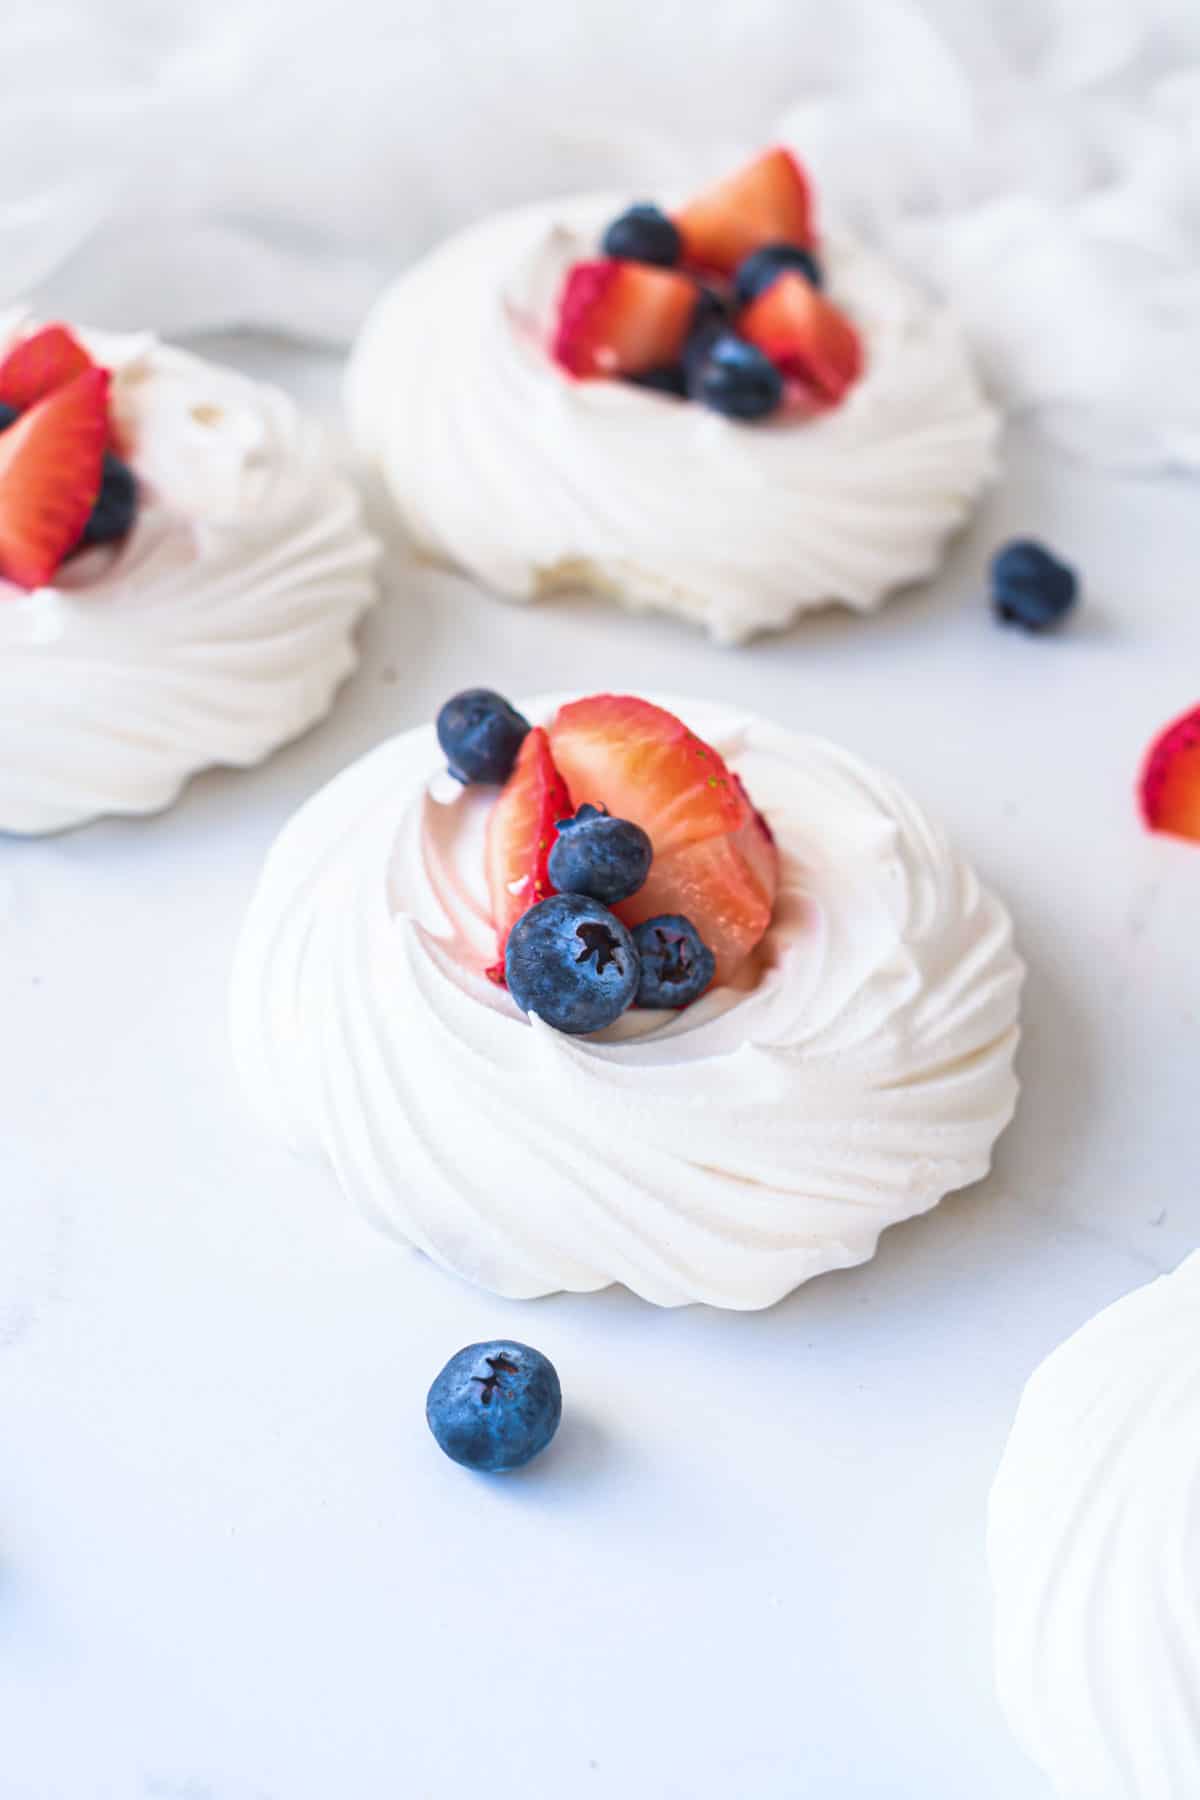 mini pavlovas filled with cream and fruit